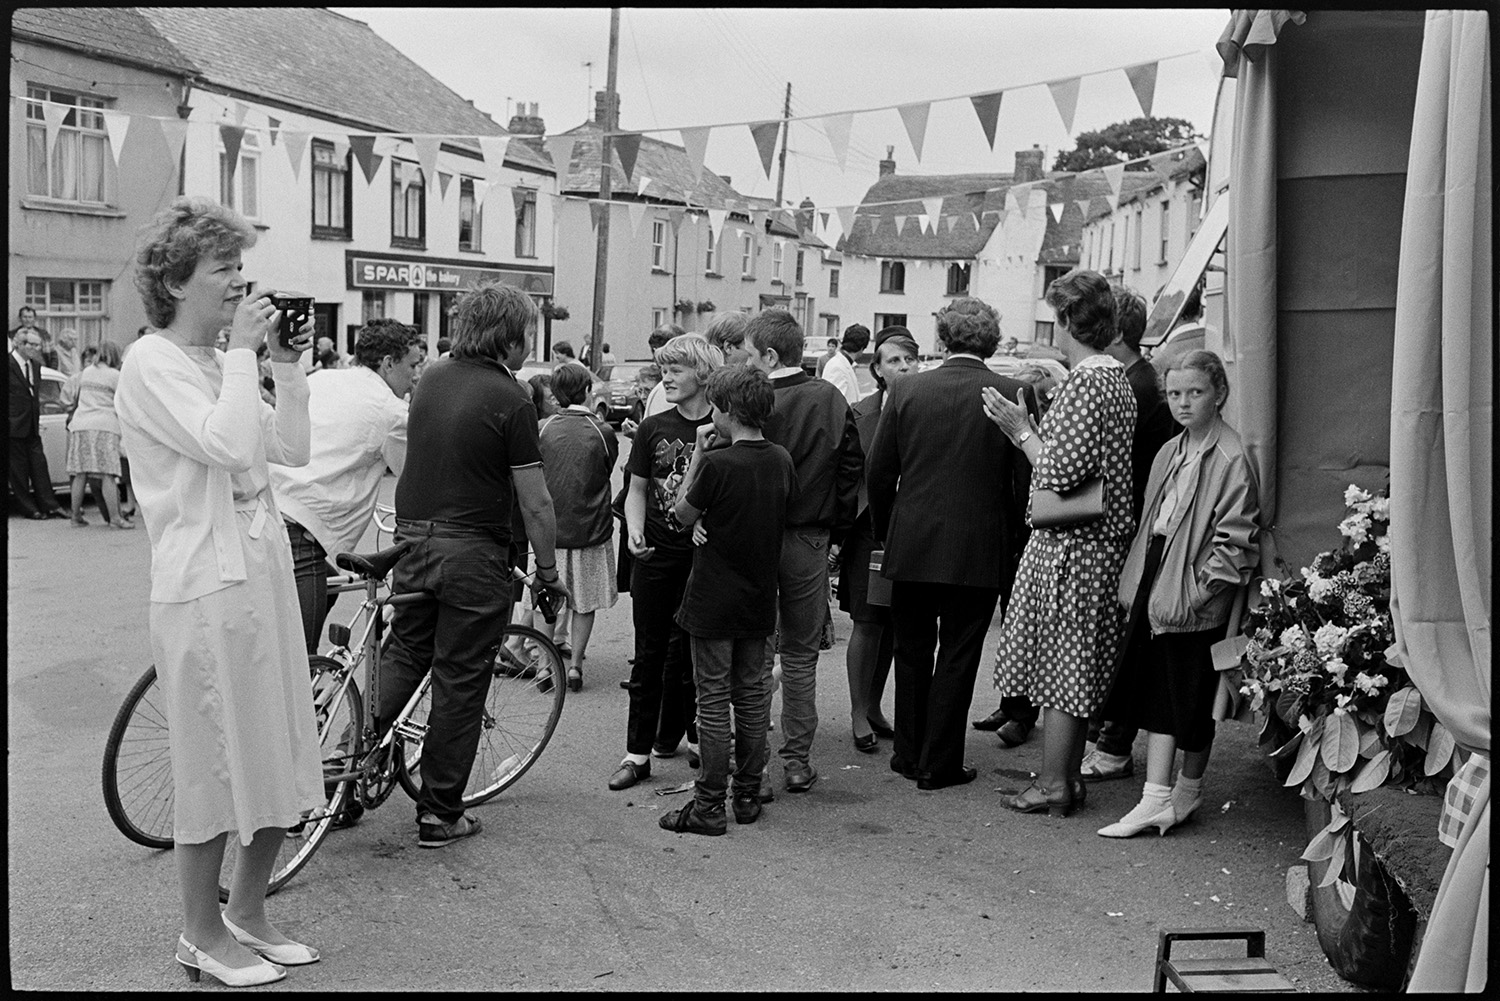 Fair Queen and attendants in village square, spectators waiting around. Photographer. 
[A woman taking a photograph of a caravan which has been converted into a stage at Winkleigh Fair. Other people are gathered around, including children and two teenagers with bicycles. The spar shop can be seen in the background and the street is decorated with bunting.]